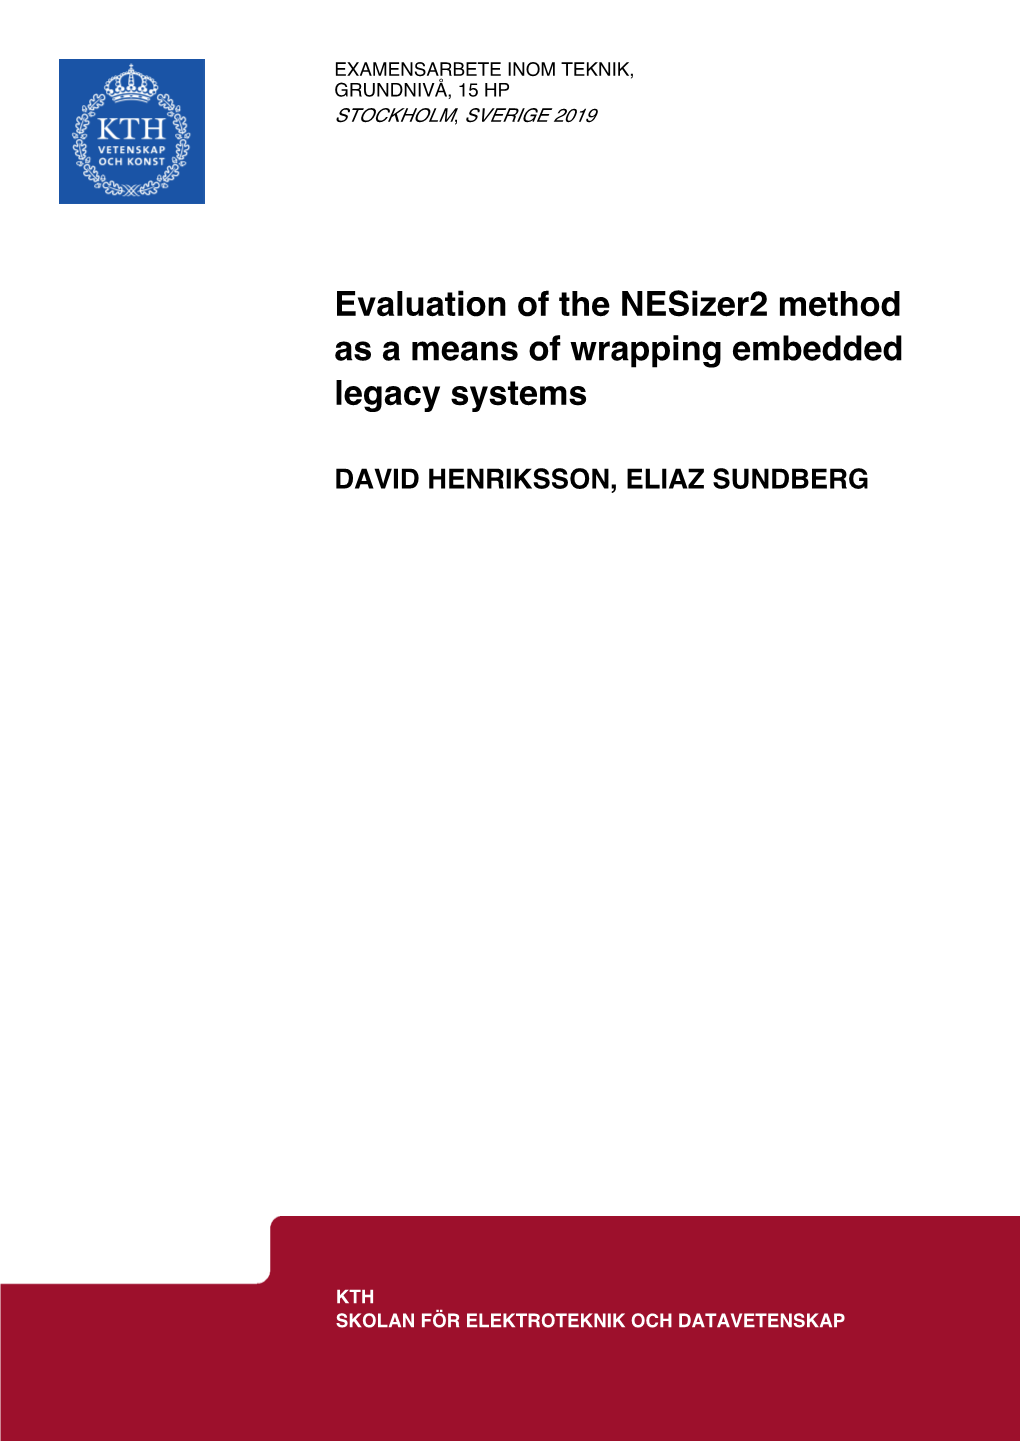 Evaluation of the Nesizer2 Method As a Means of Wrapping Embedded Legacy Systems